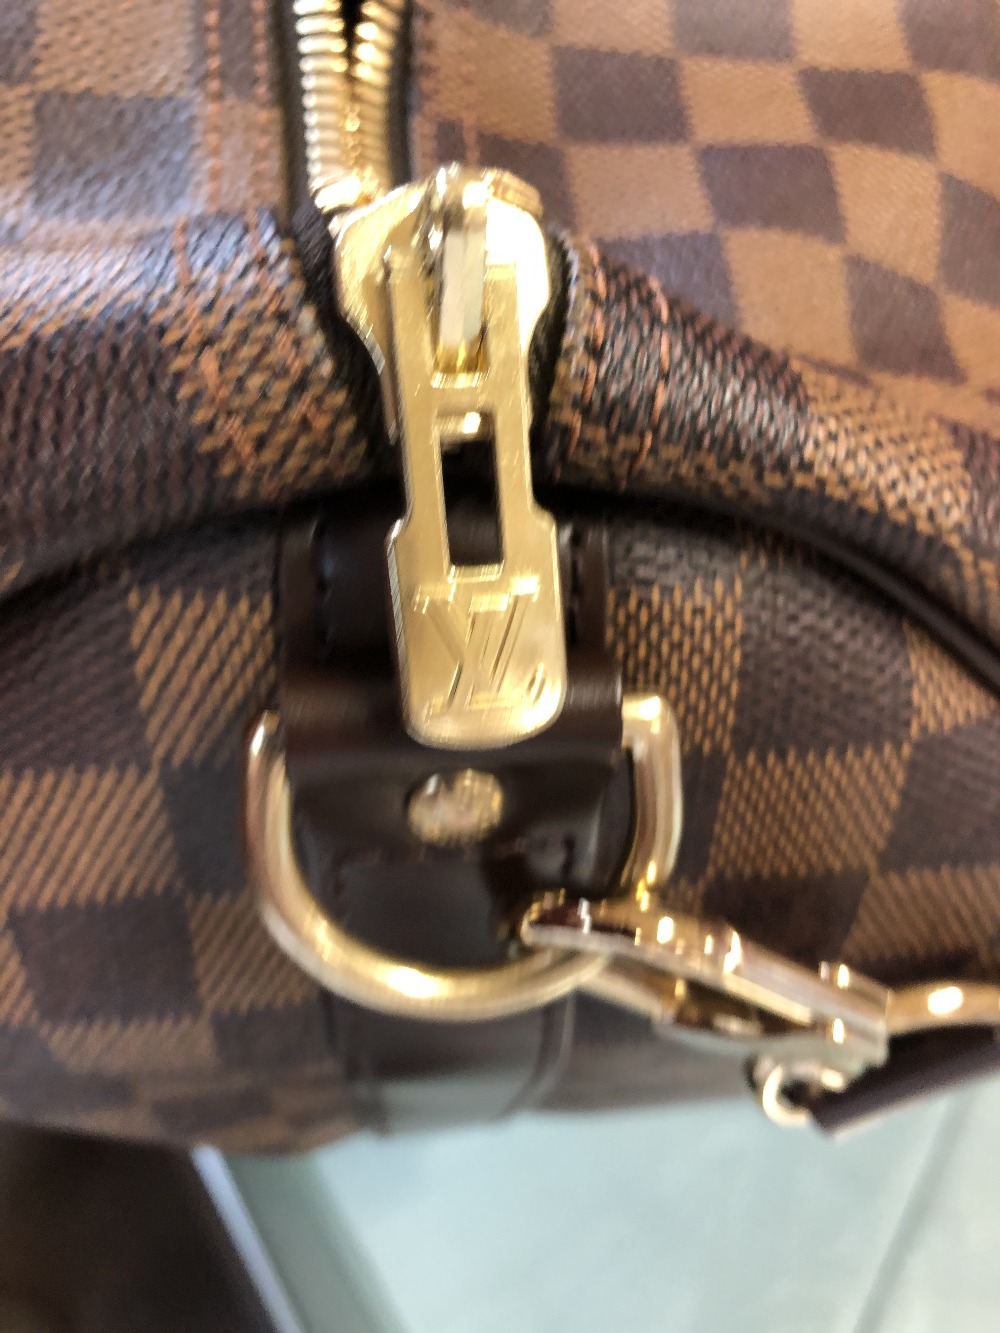 LOUIS VUITTON; a Keepall Bandouliere 55 Monogram macassar Boston bag, with brown leather straps - Image 4 of 9